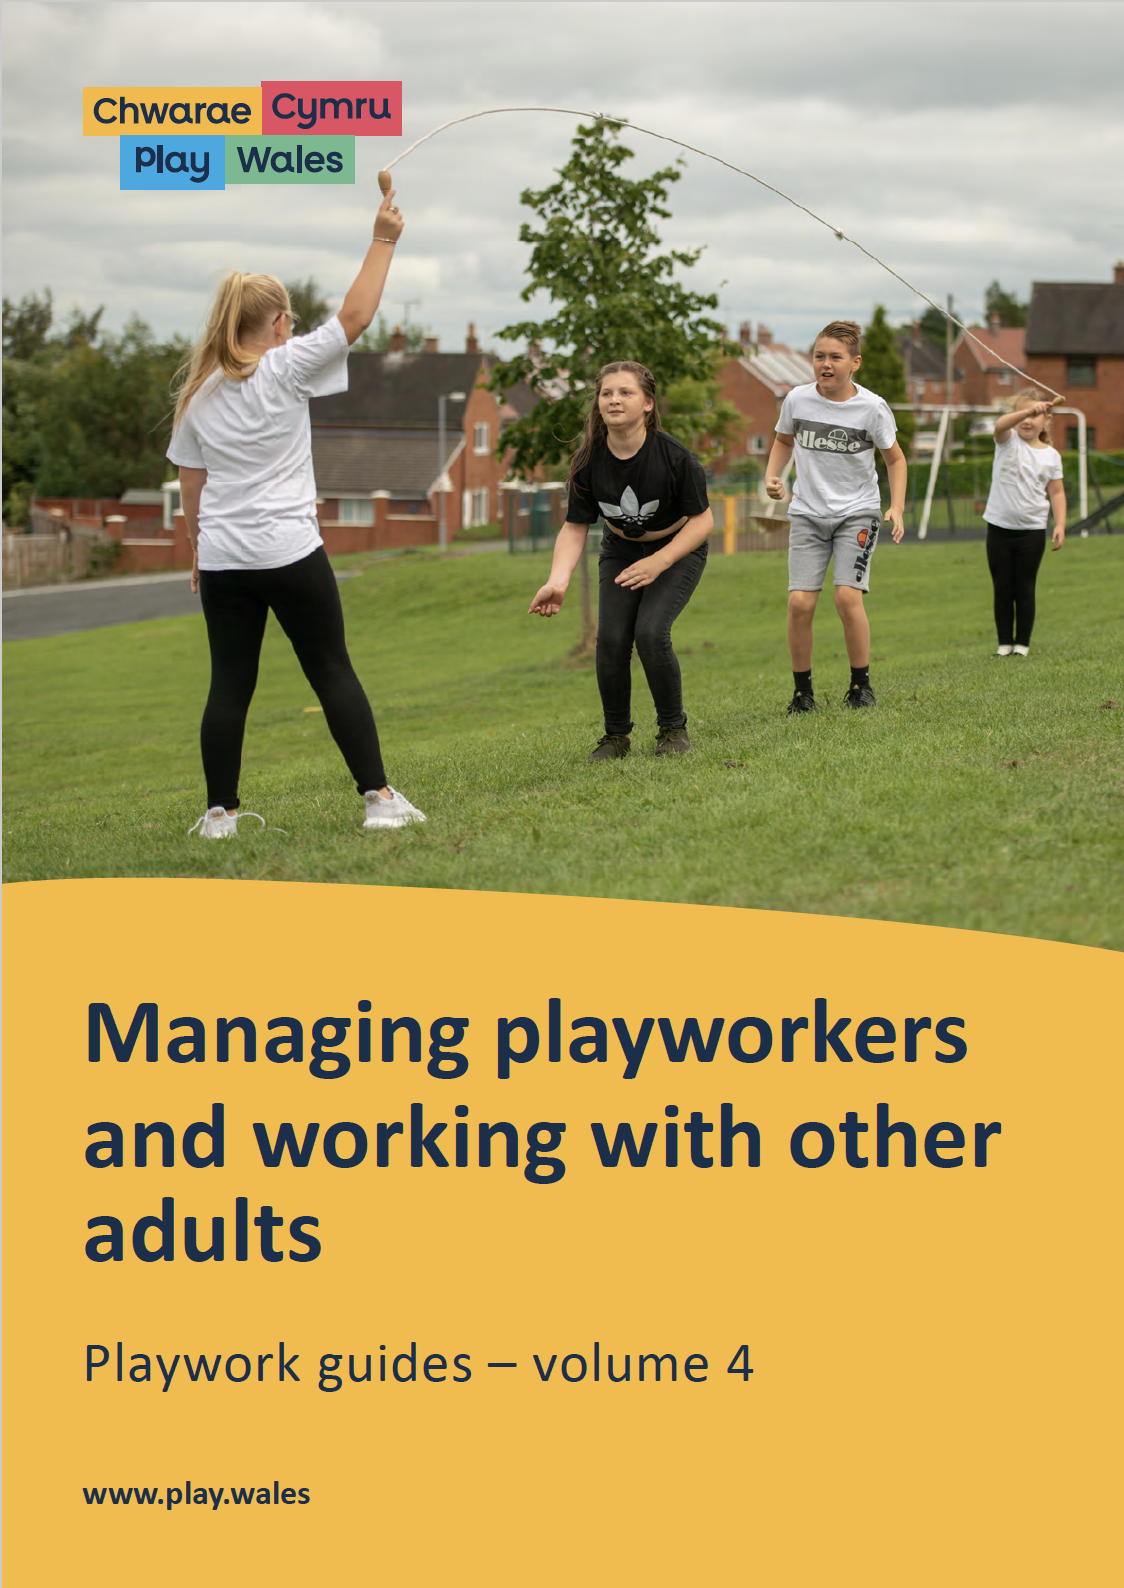 Managing playworkers and working with other adults